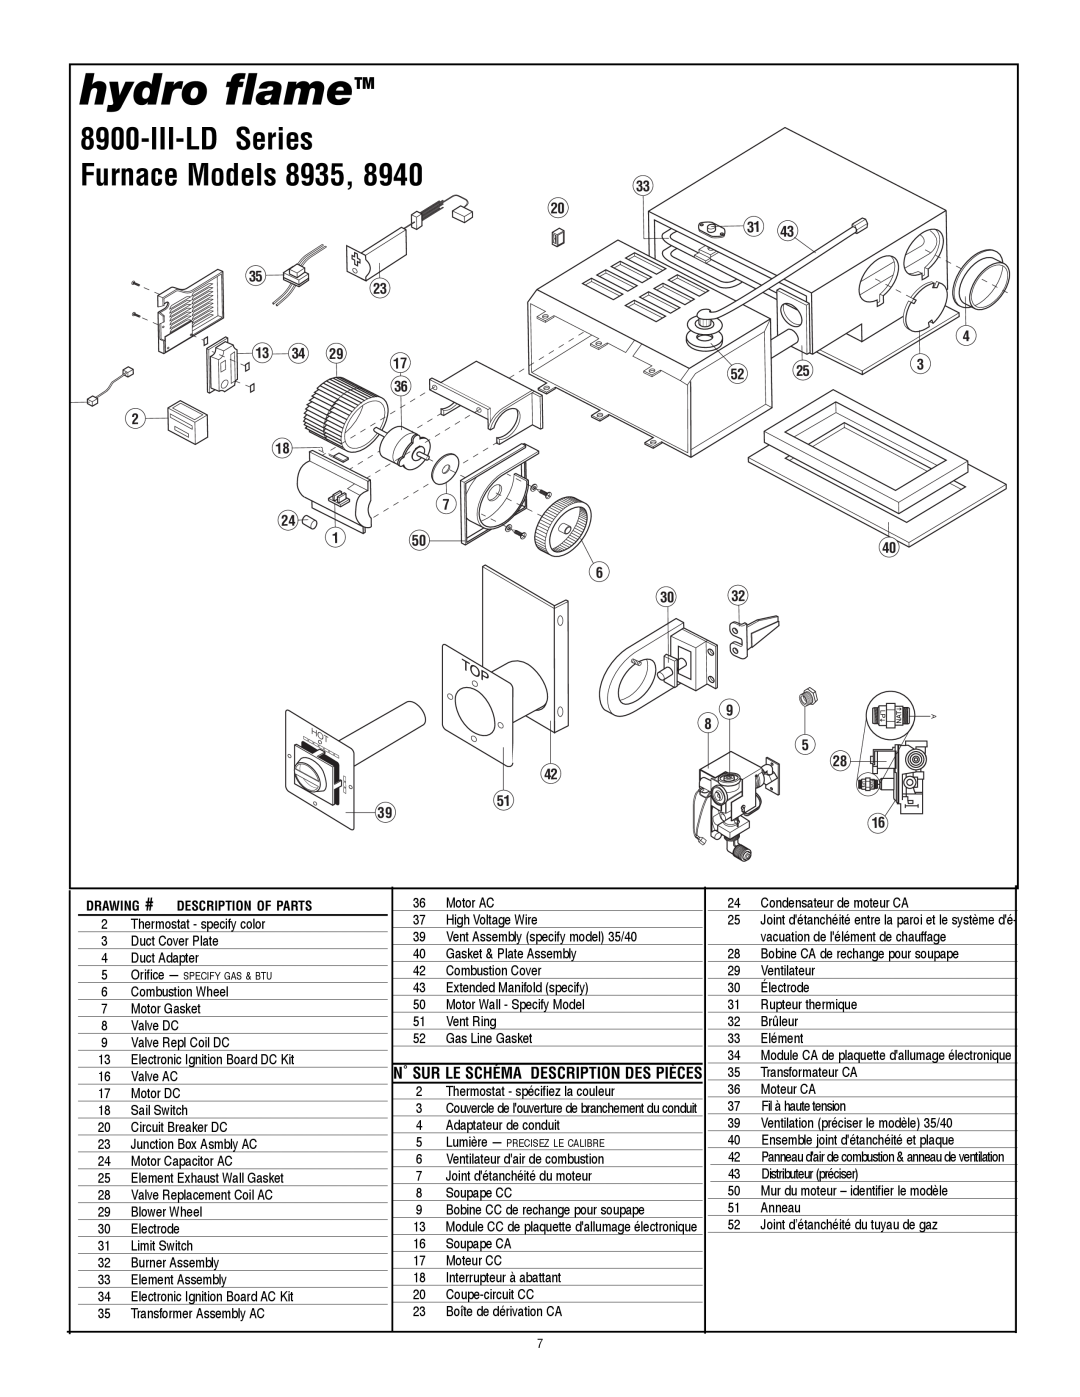 Atwood Mobile Products 8935, 8940 installation manual Furnace Models, hydro flameTM, III-LDSeries 